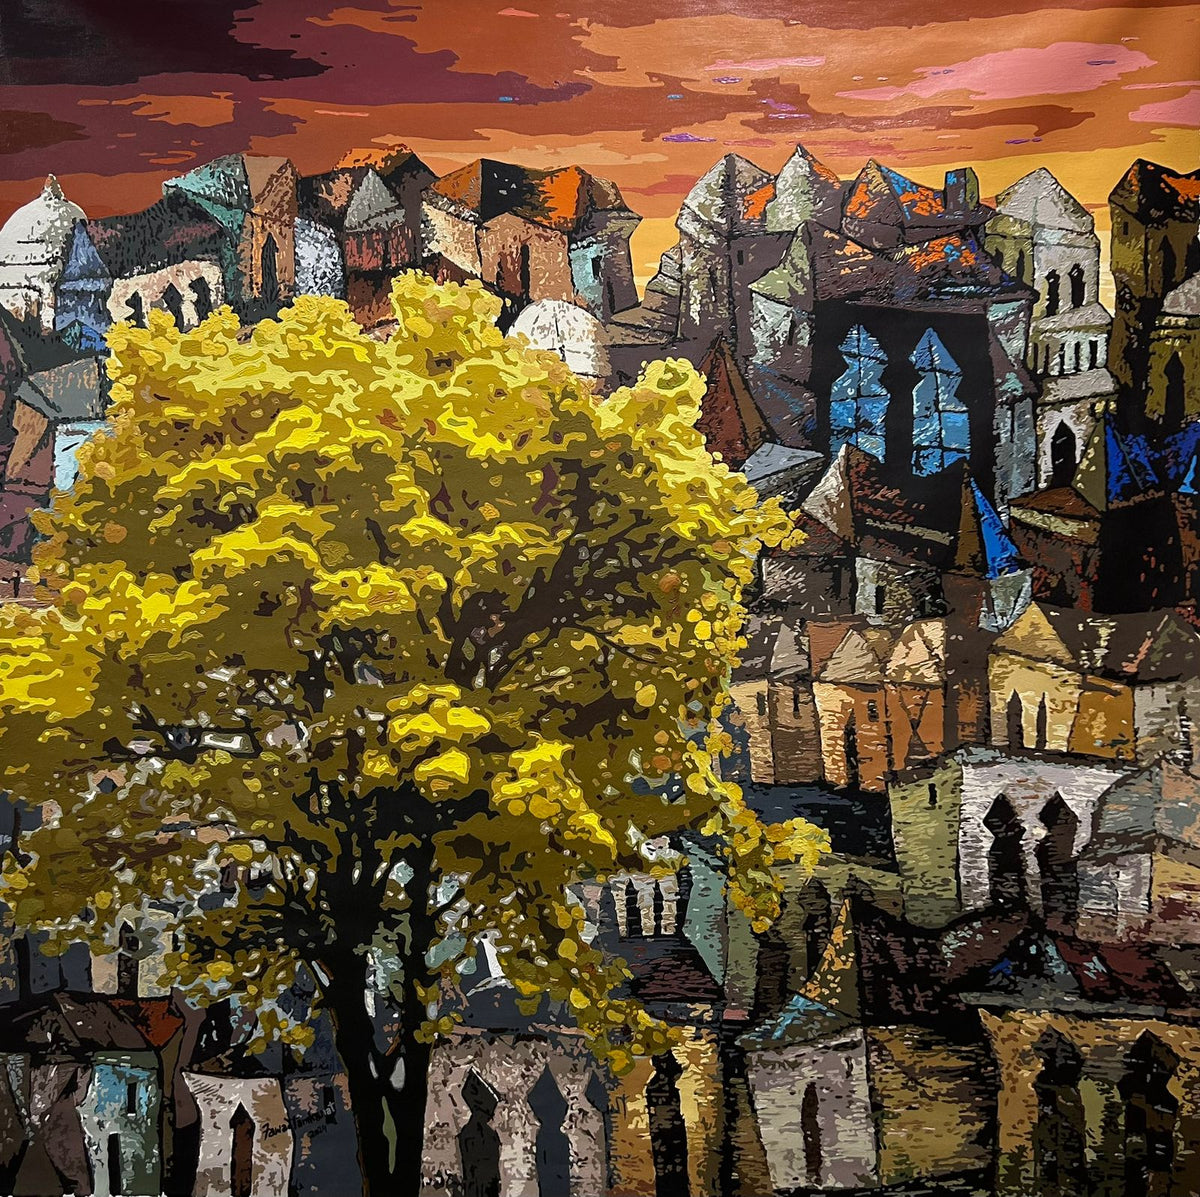 A beautiful cityscape with orange hued dusk overlooking a town beckons with a yellow tree blooming in the foreground. Artwork by prominent artist Fawad Tamkanat